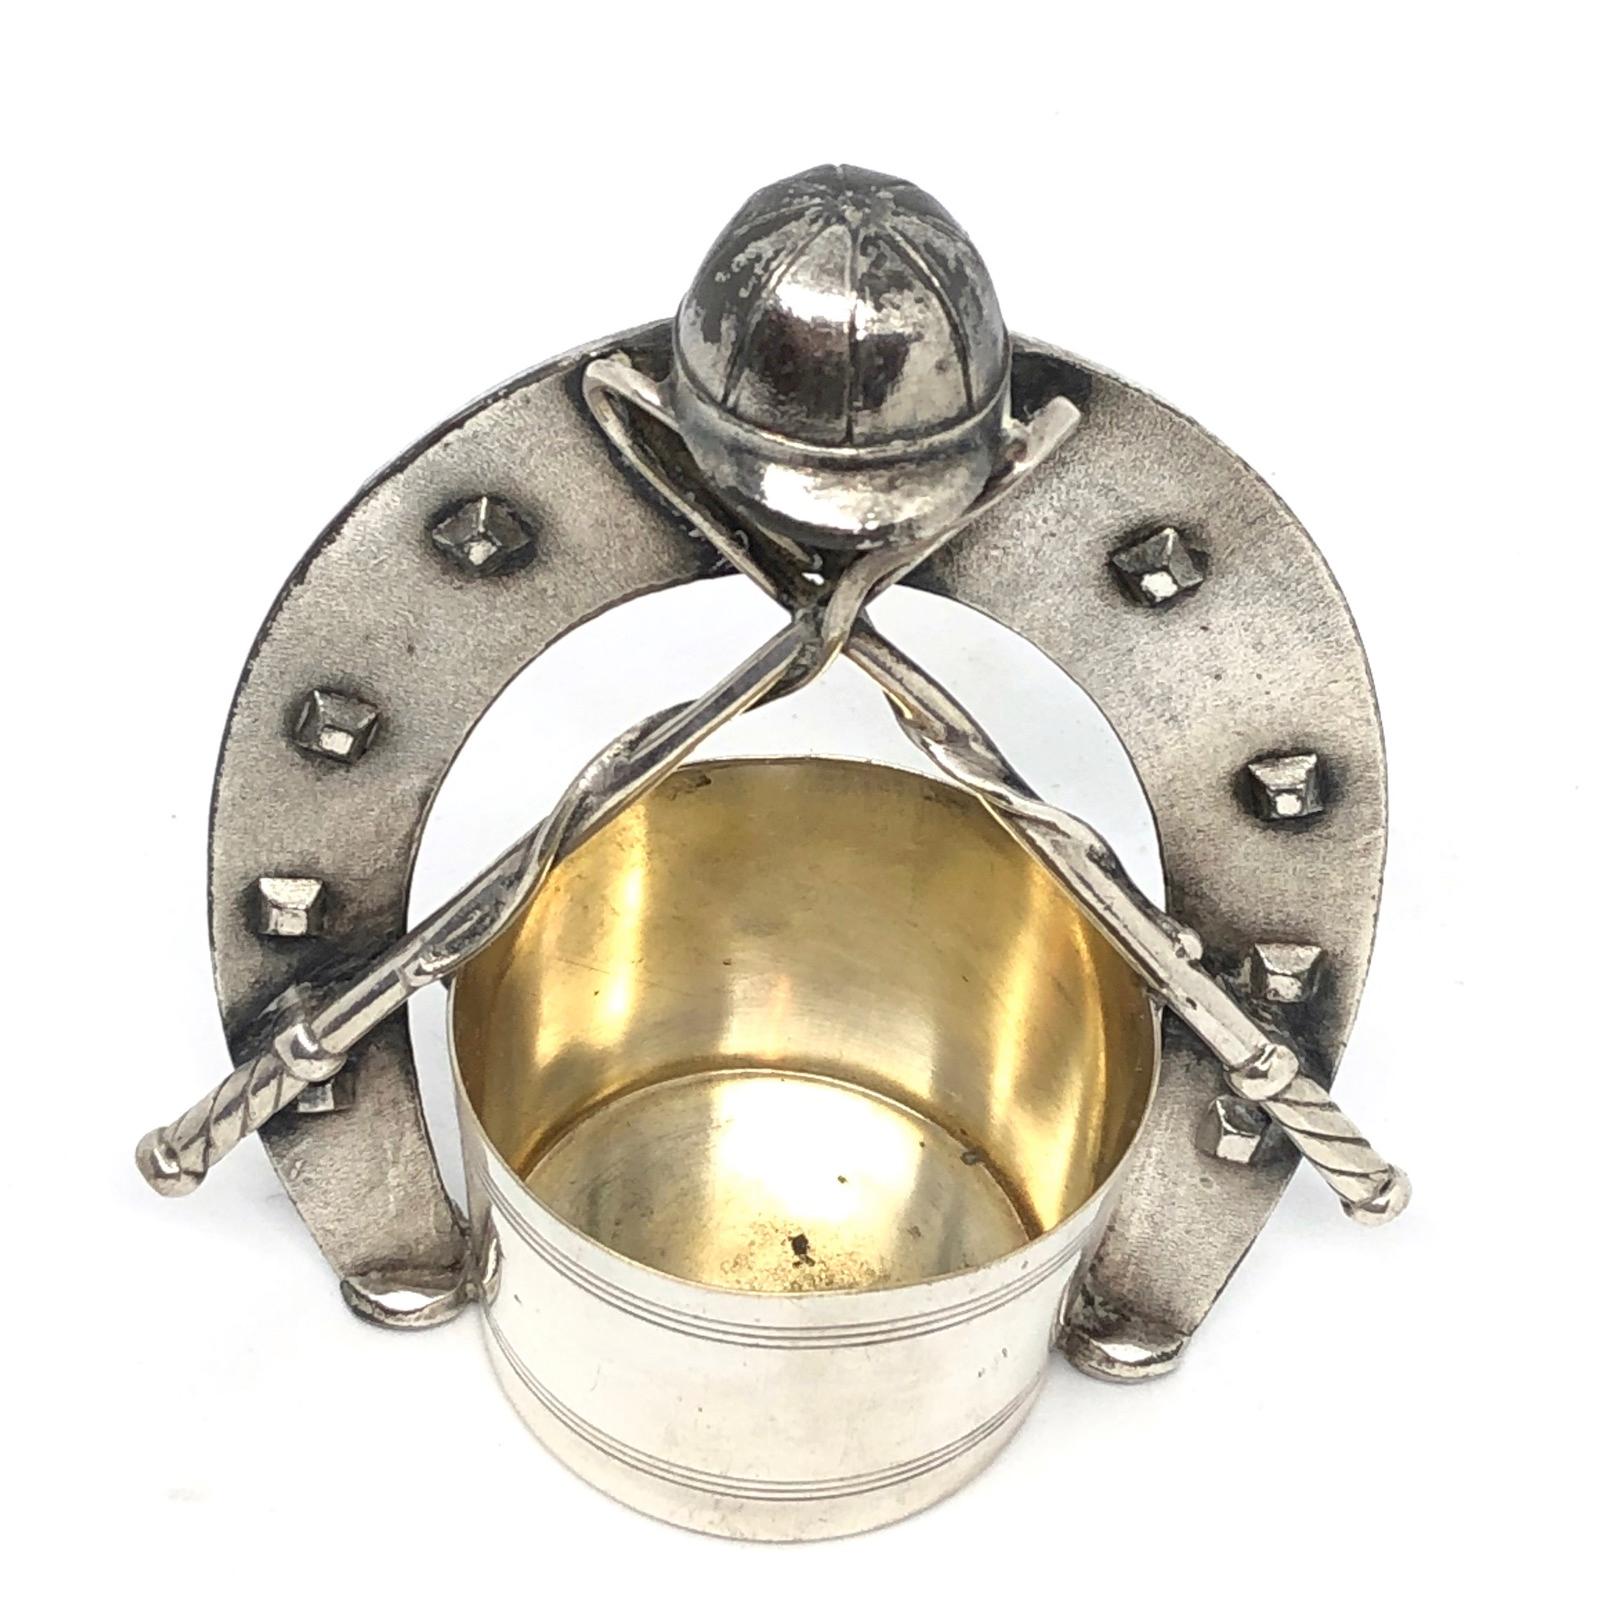 Gorgeous silver plated, 1920s small pot with a horseshoe and some horse race related items. Think it can be used at a table for paperclips, toothpicks, matchsticks or just as a open salt pot. It is not marked and not signed, found at a estate sale